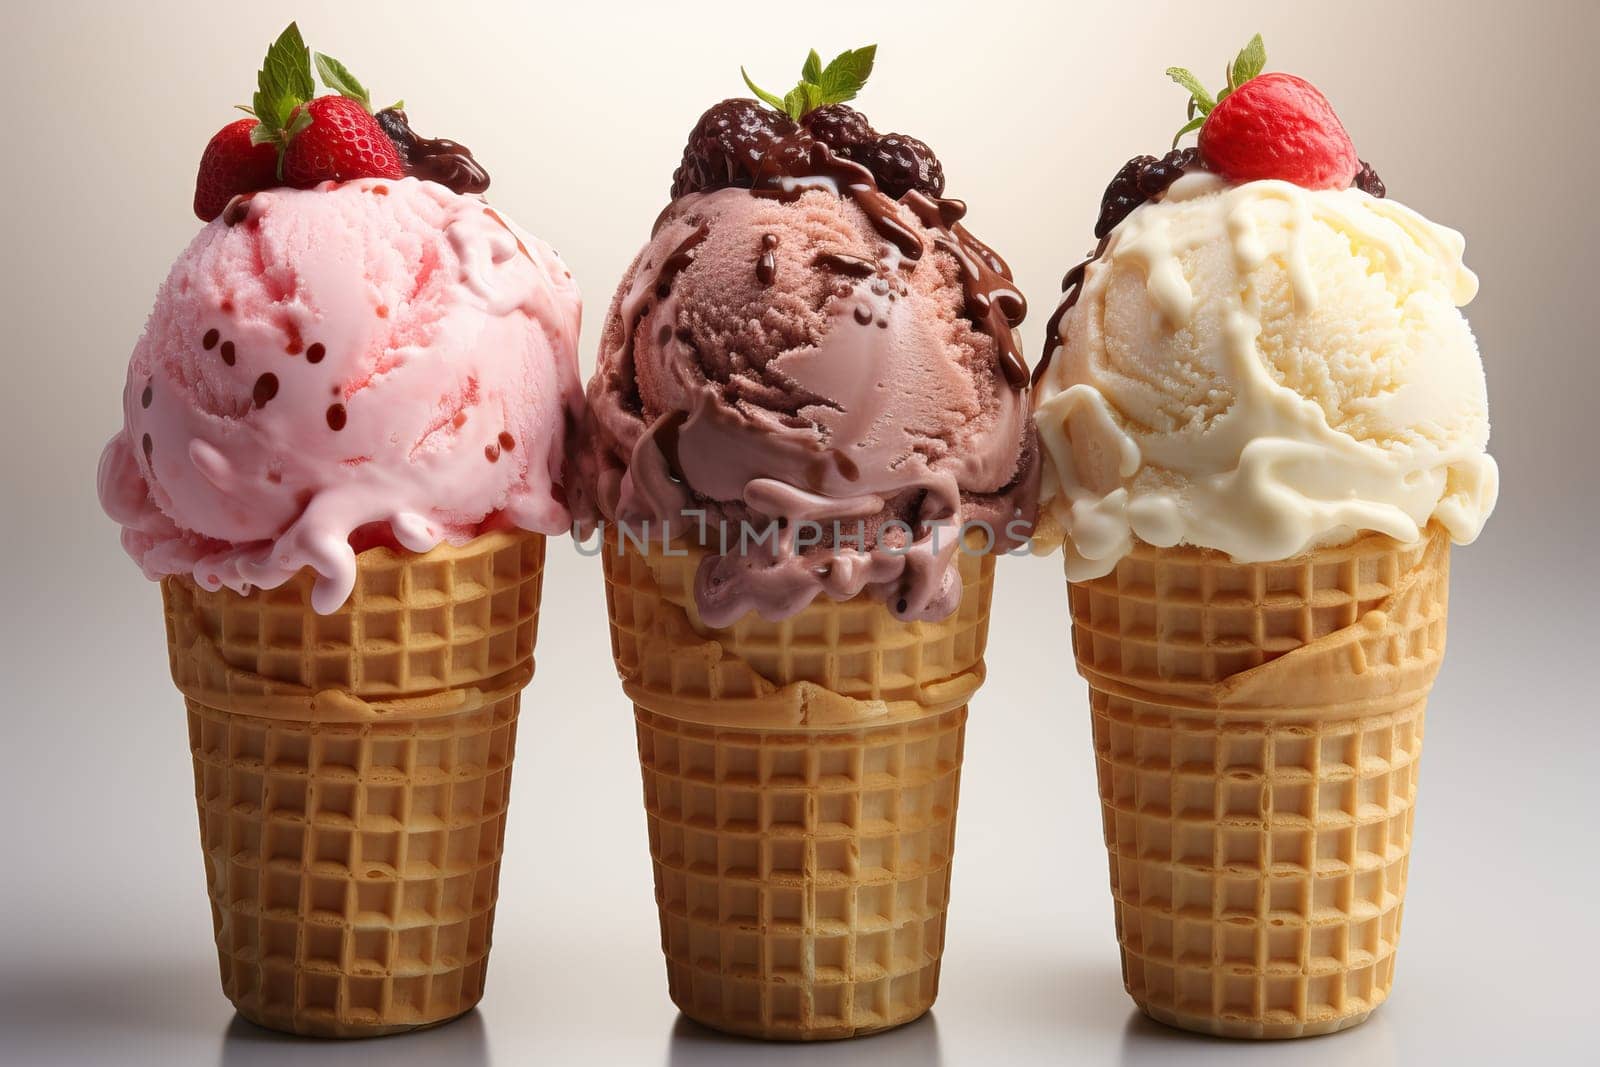 Three scoops of chocolate, strawberry and vanilla ice cream in a waffle cone topped with chocolate chips.